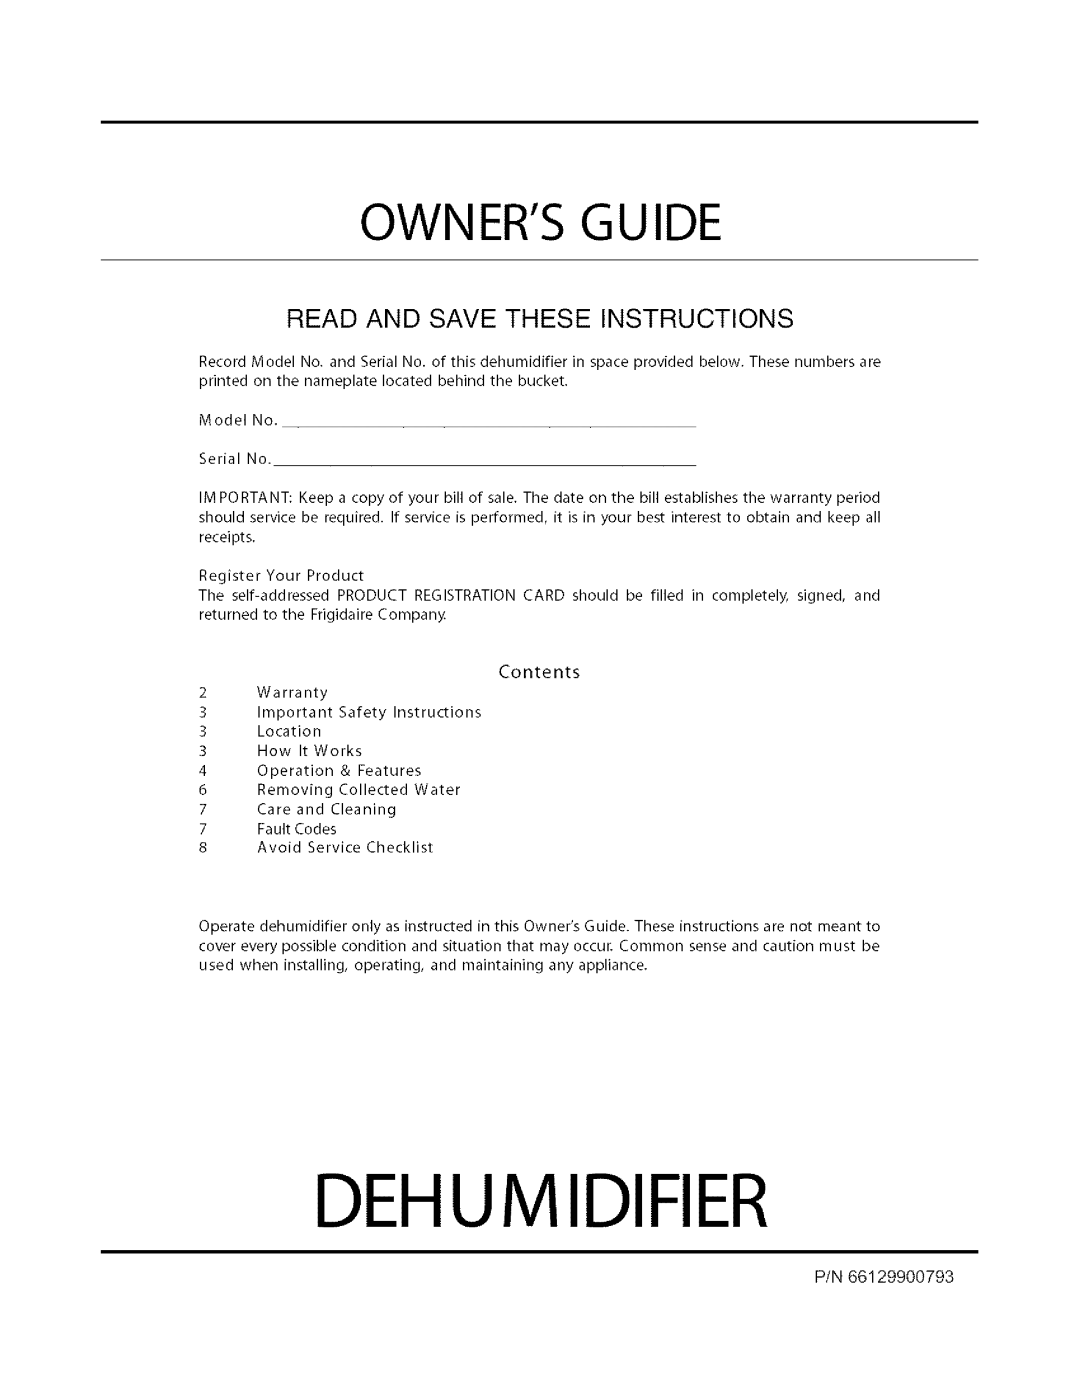 Electrolux Dehumidifier warranty Read And Save These Instructions, Ownersguide, Contents 